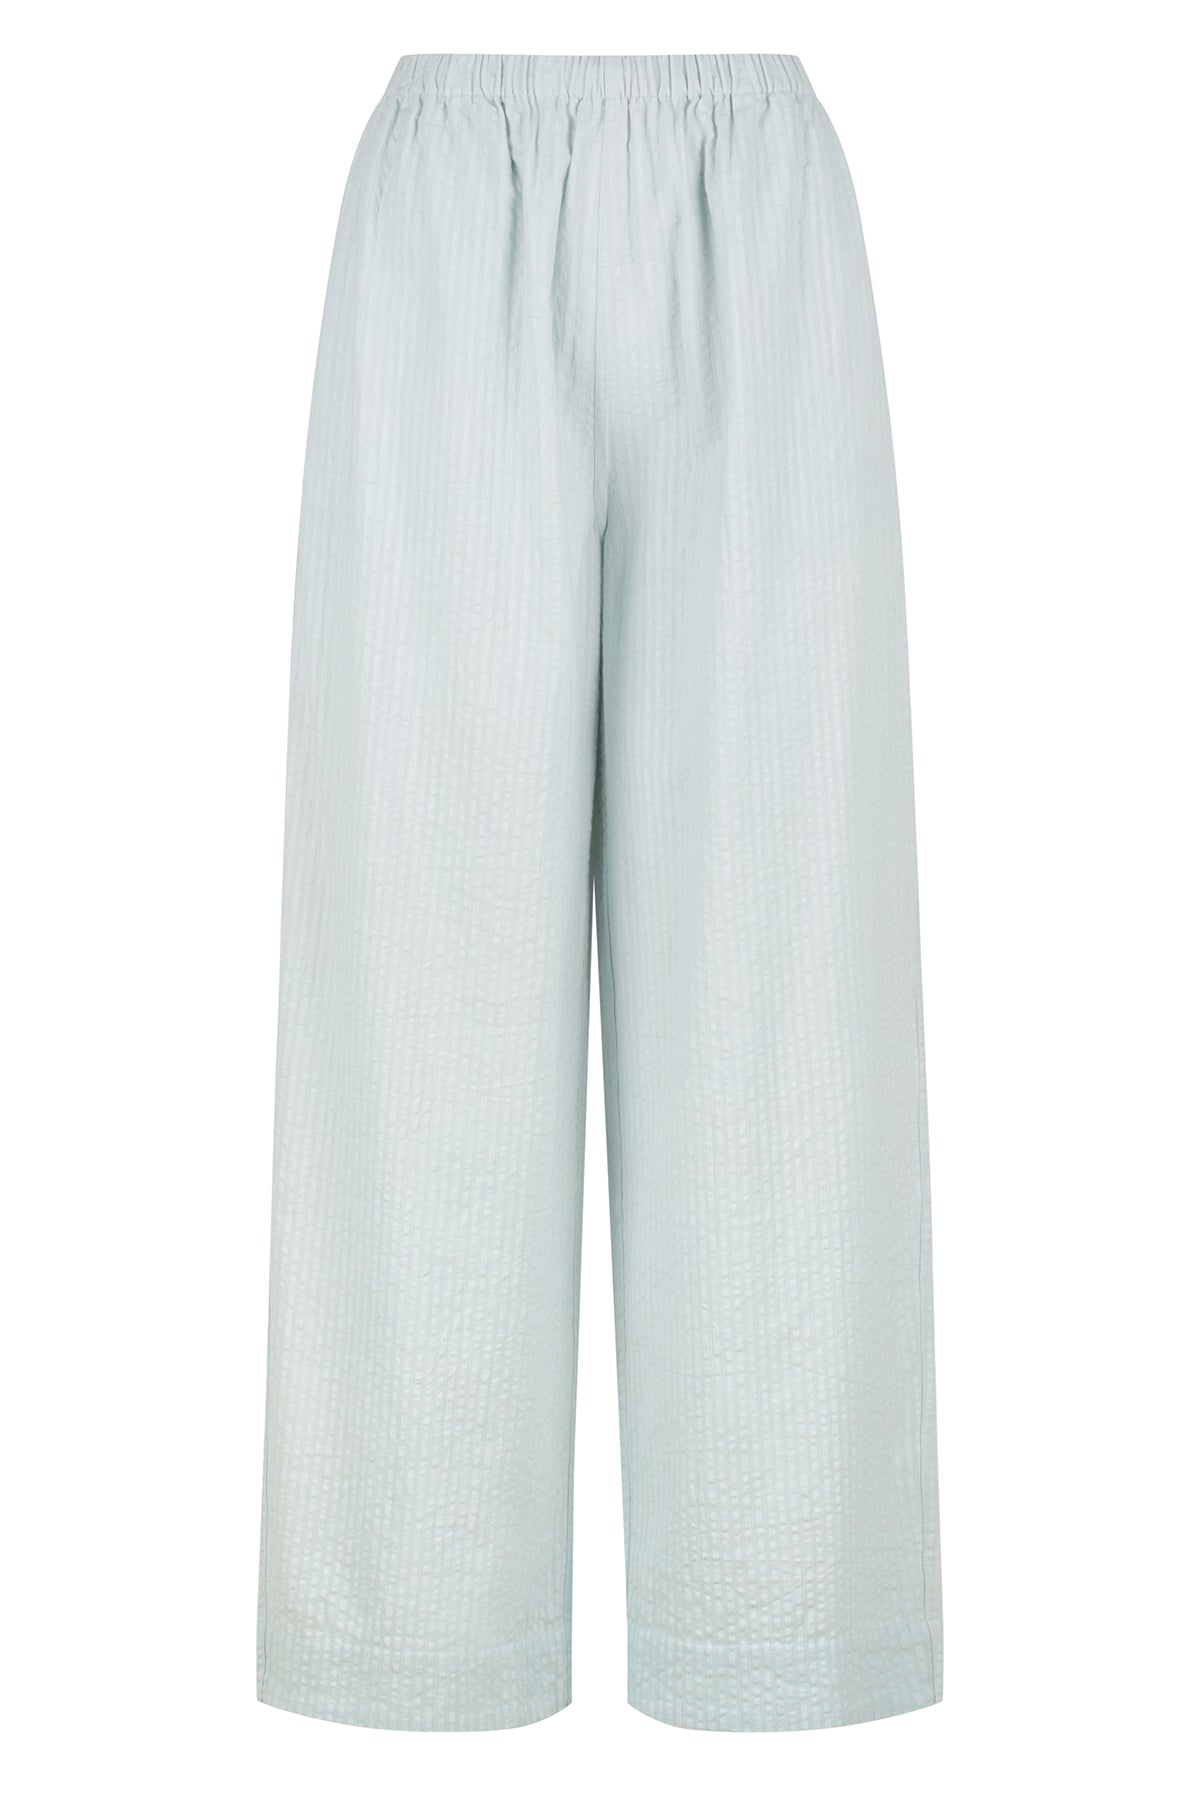 Sonnie Pant - Baby Blue